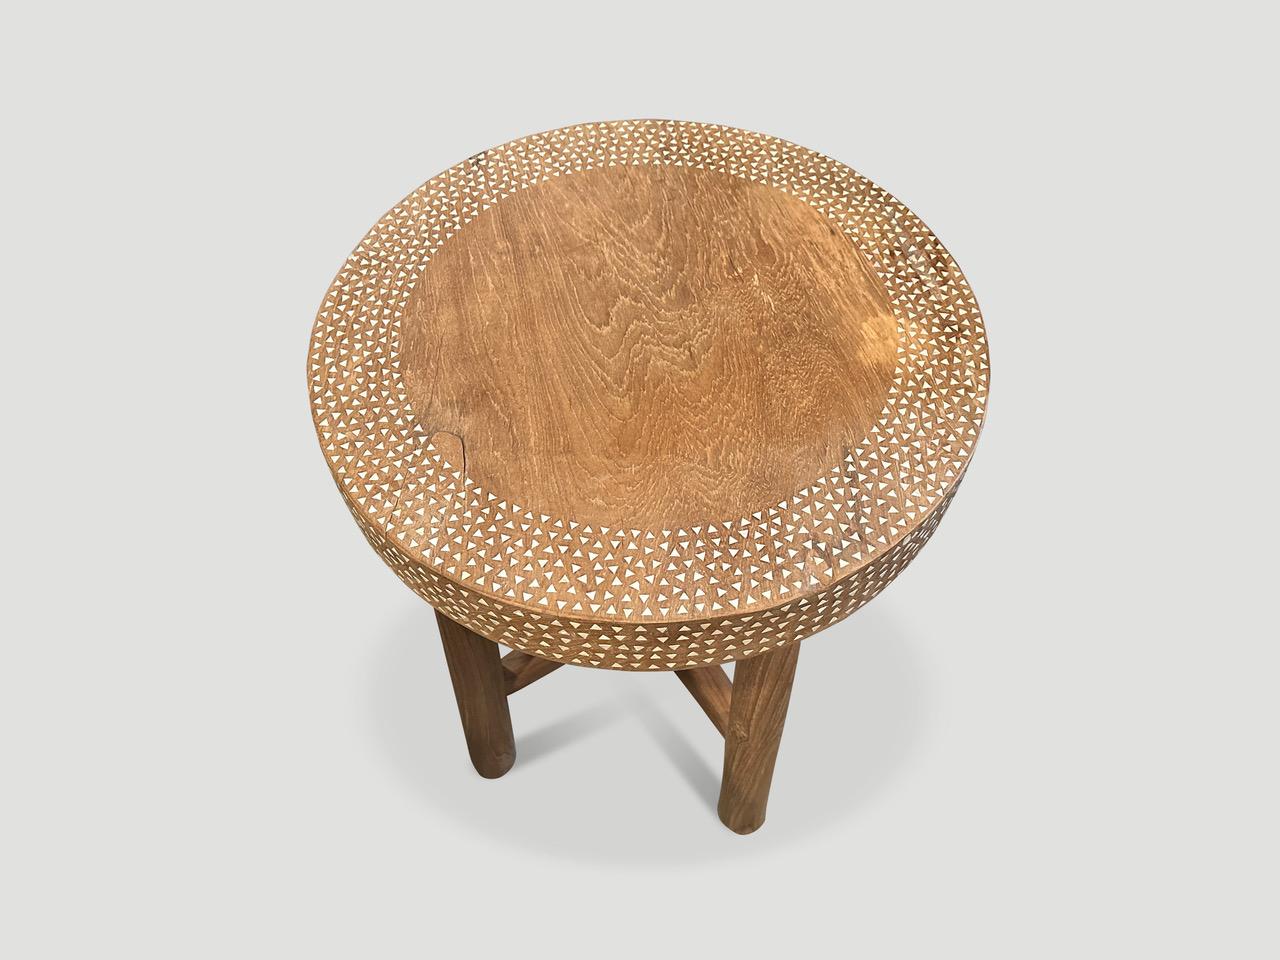 Andrianna Shamaris Minimalist Shell Inlaid Teak Round Side Table or Pedestal In Excellent Condition For Sale In New York, NY